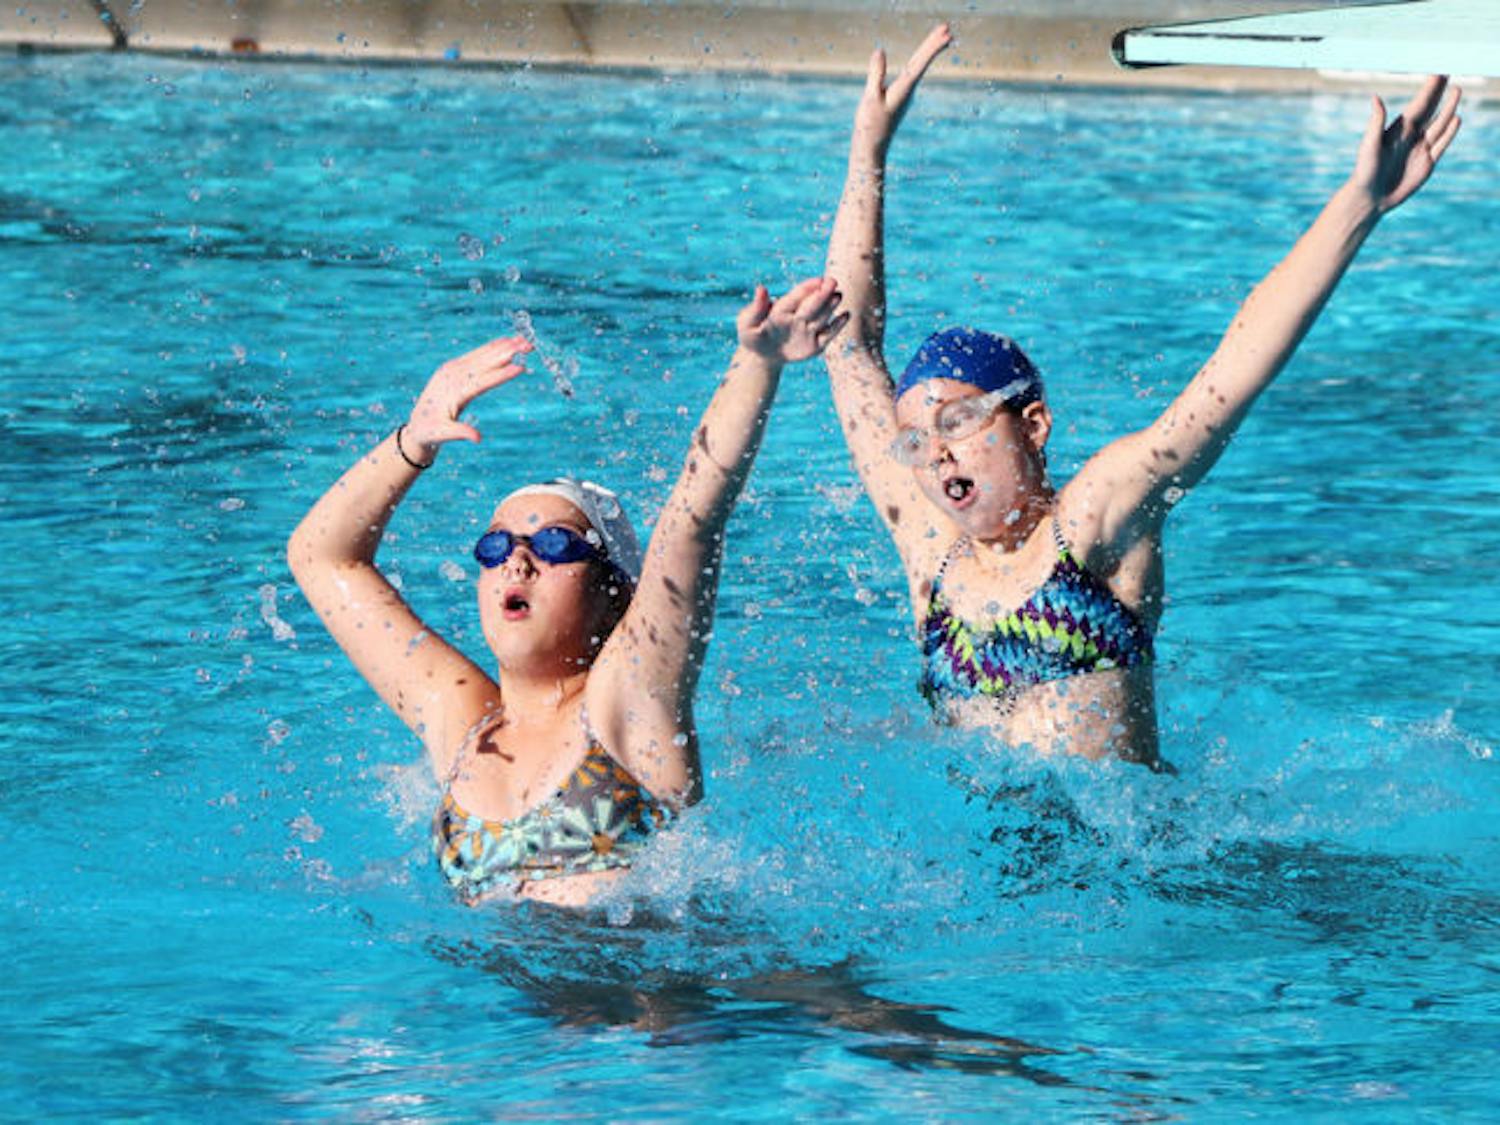 Lauren, 13, and Bonnie, 12, practice synchronized swimming in the Dwight H. Hunter Municipal Pool on Saturday. The Synchro Gainesville team is preparing for the NE/NW Association Championship on April 27 and 28 in Cocoa Beach.